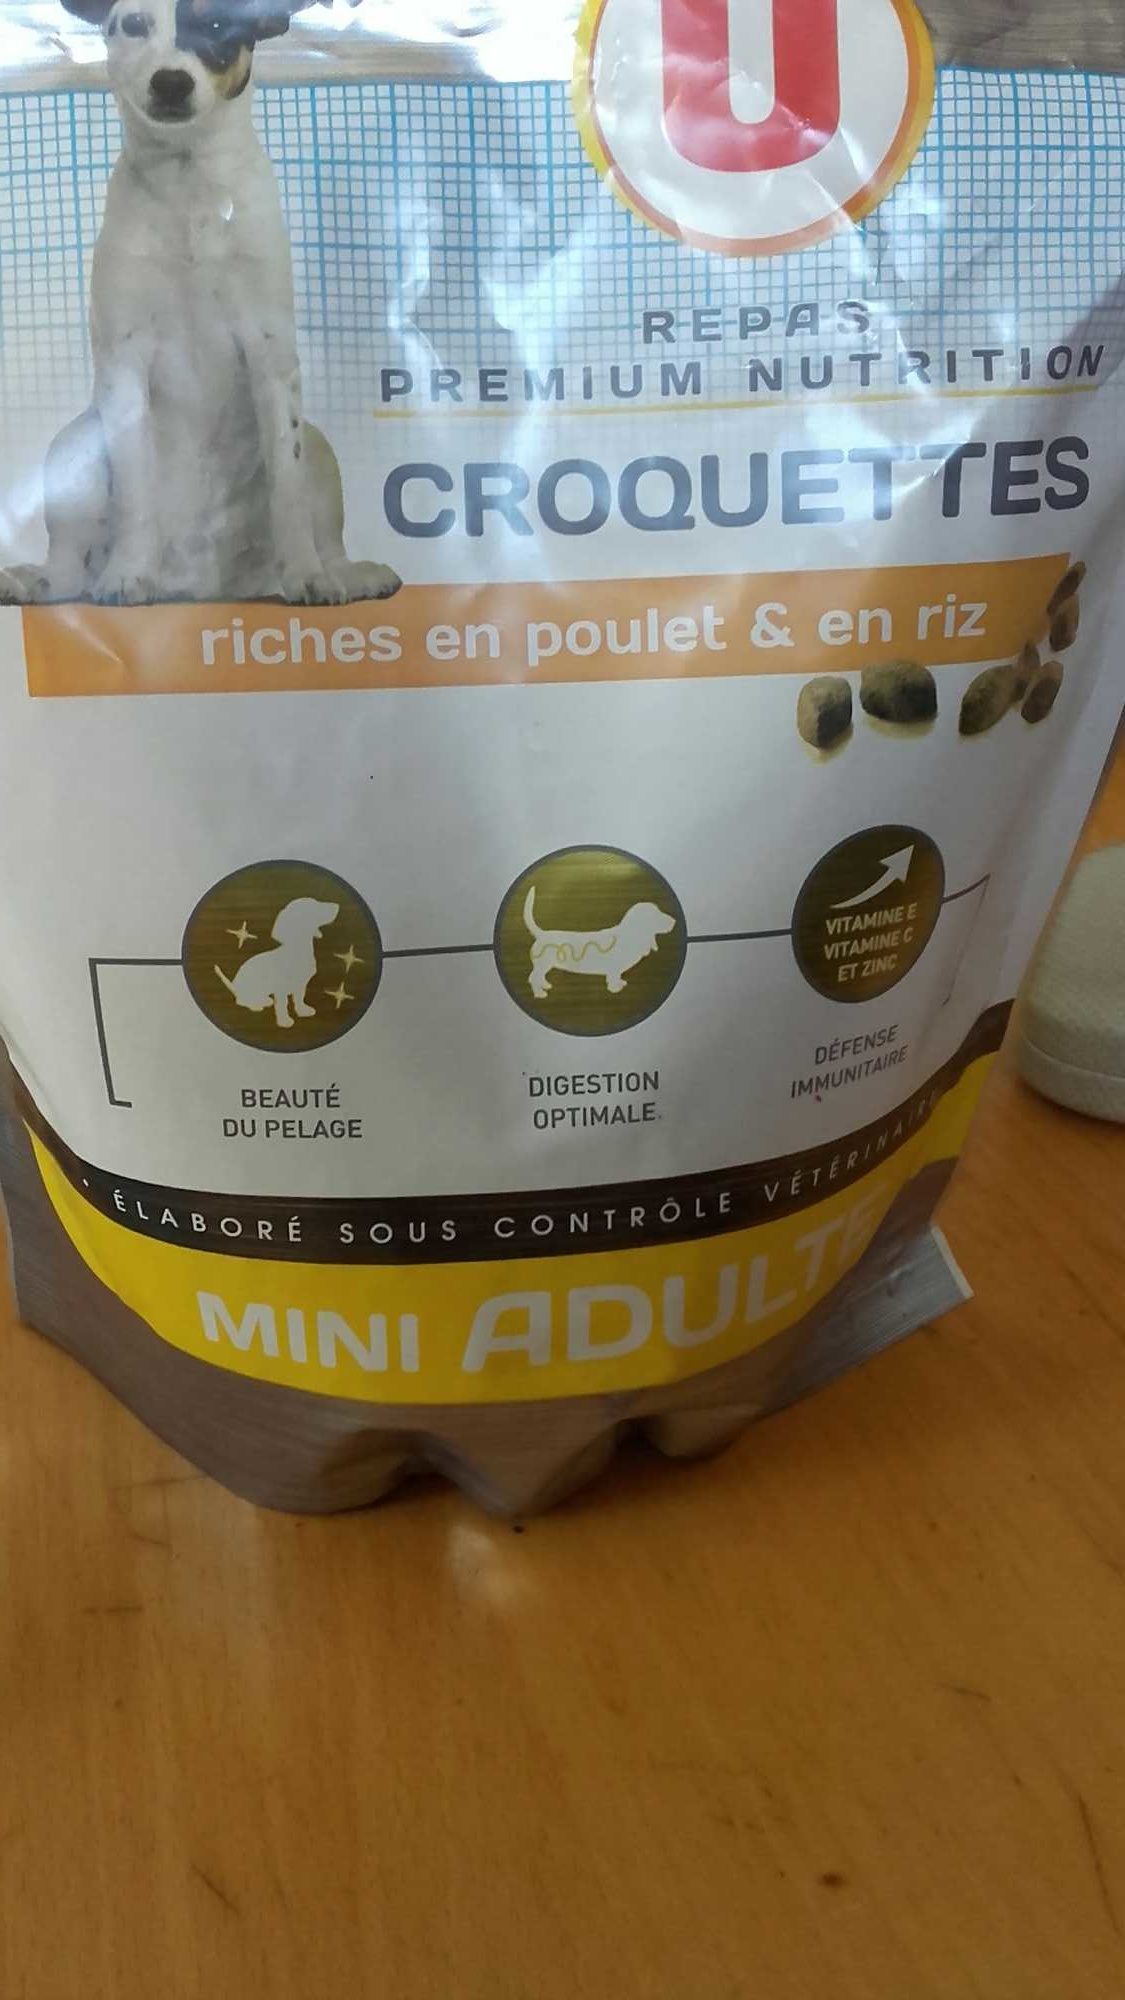 Croquettes - Product - fr